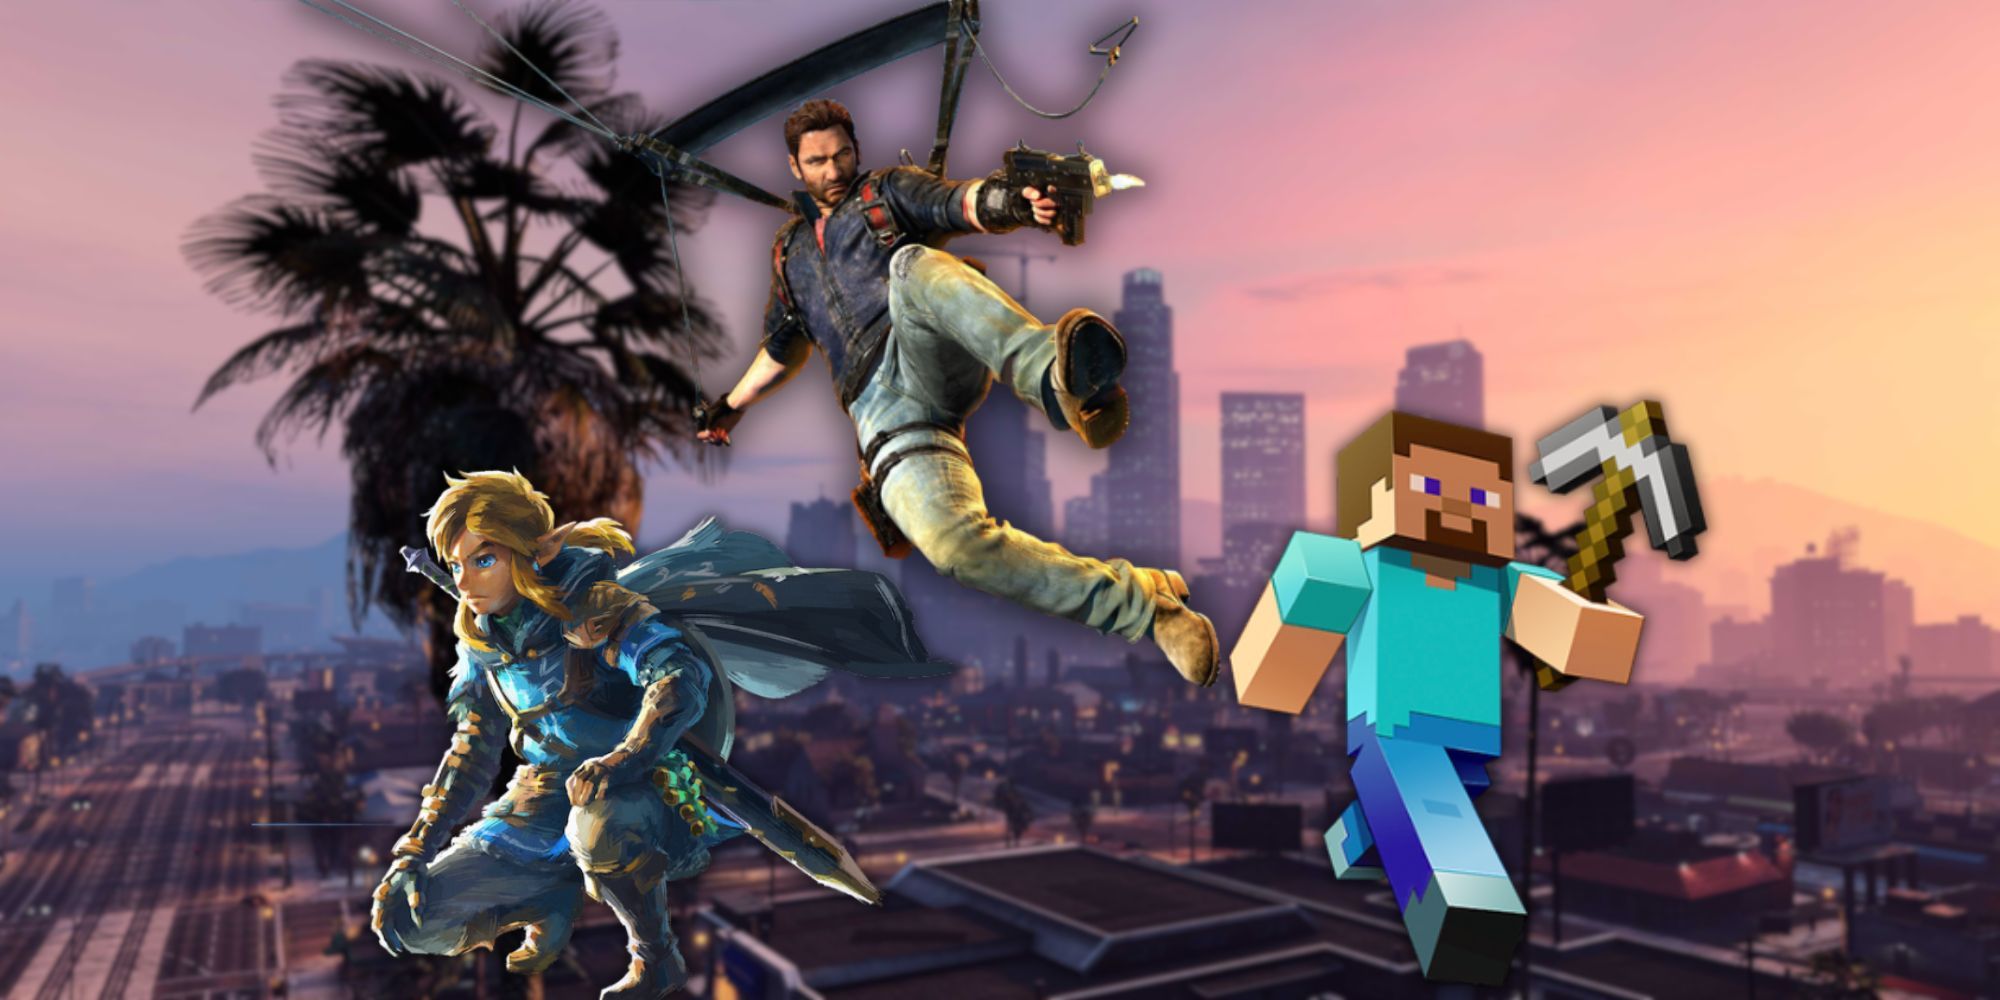 Sandbox Games Featured Image Los Santos Background with Just Cause 3 character, Link, and Minecraft Steve in the foreground